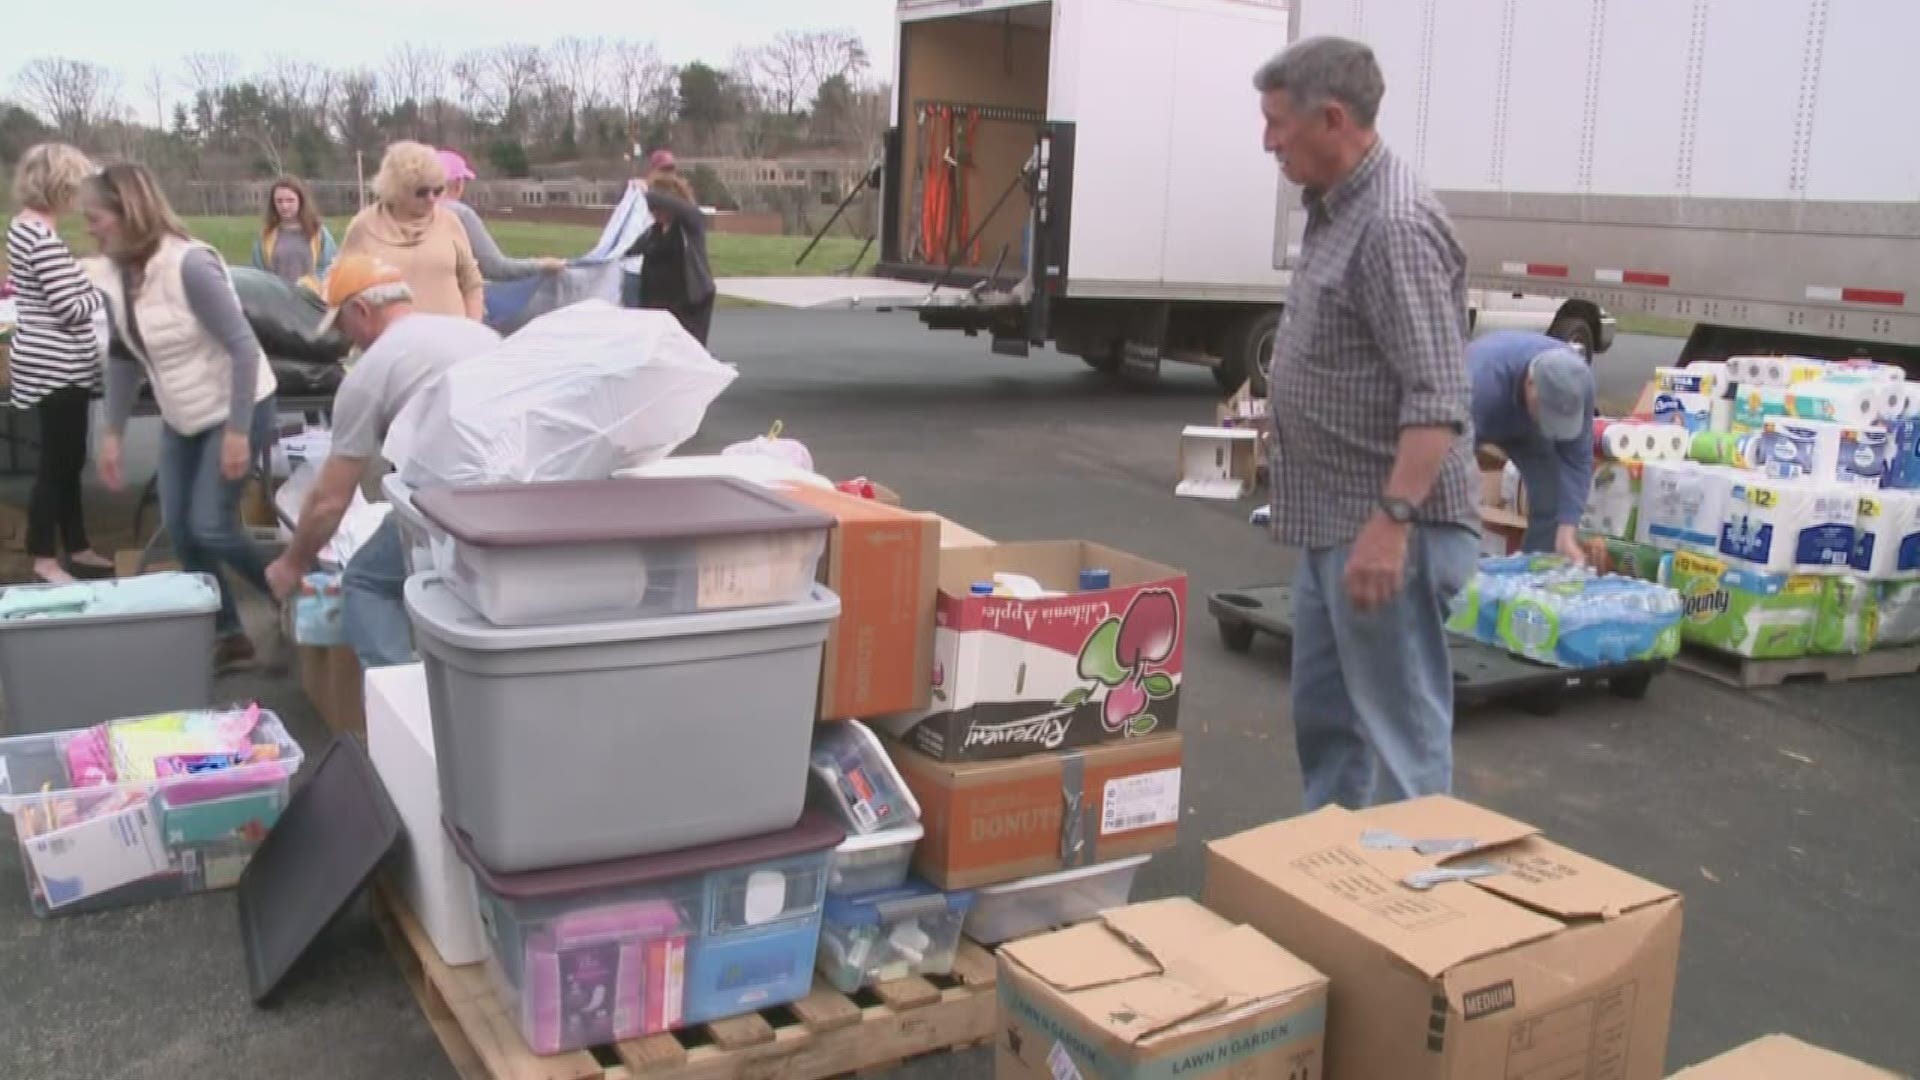 A Farragut church group collecting supplies for storm victims said it is overwhelmed with the community's support.